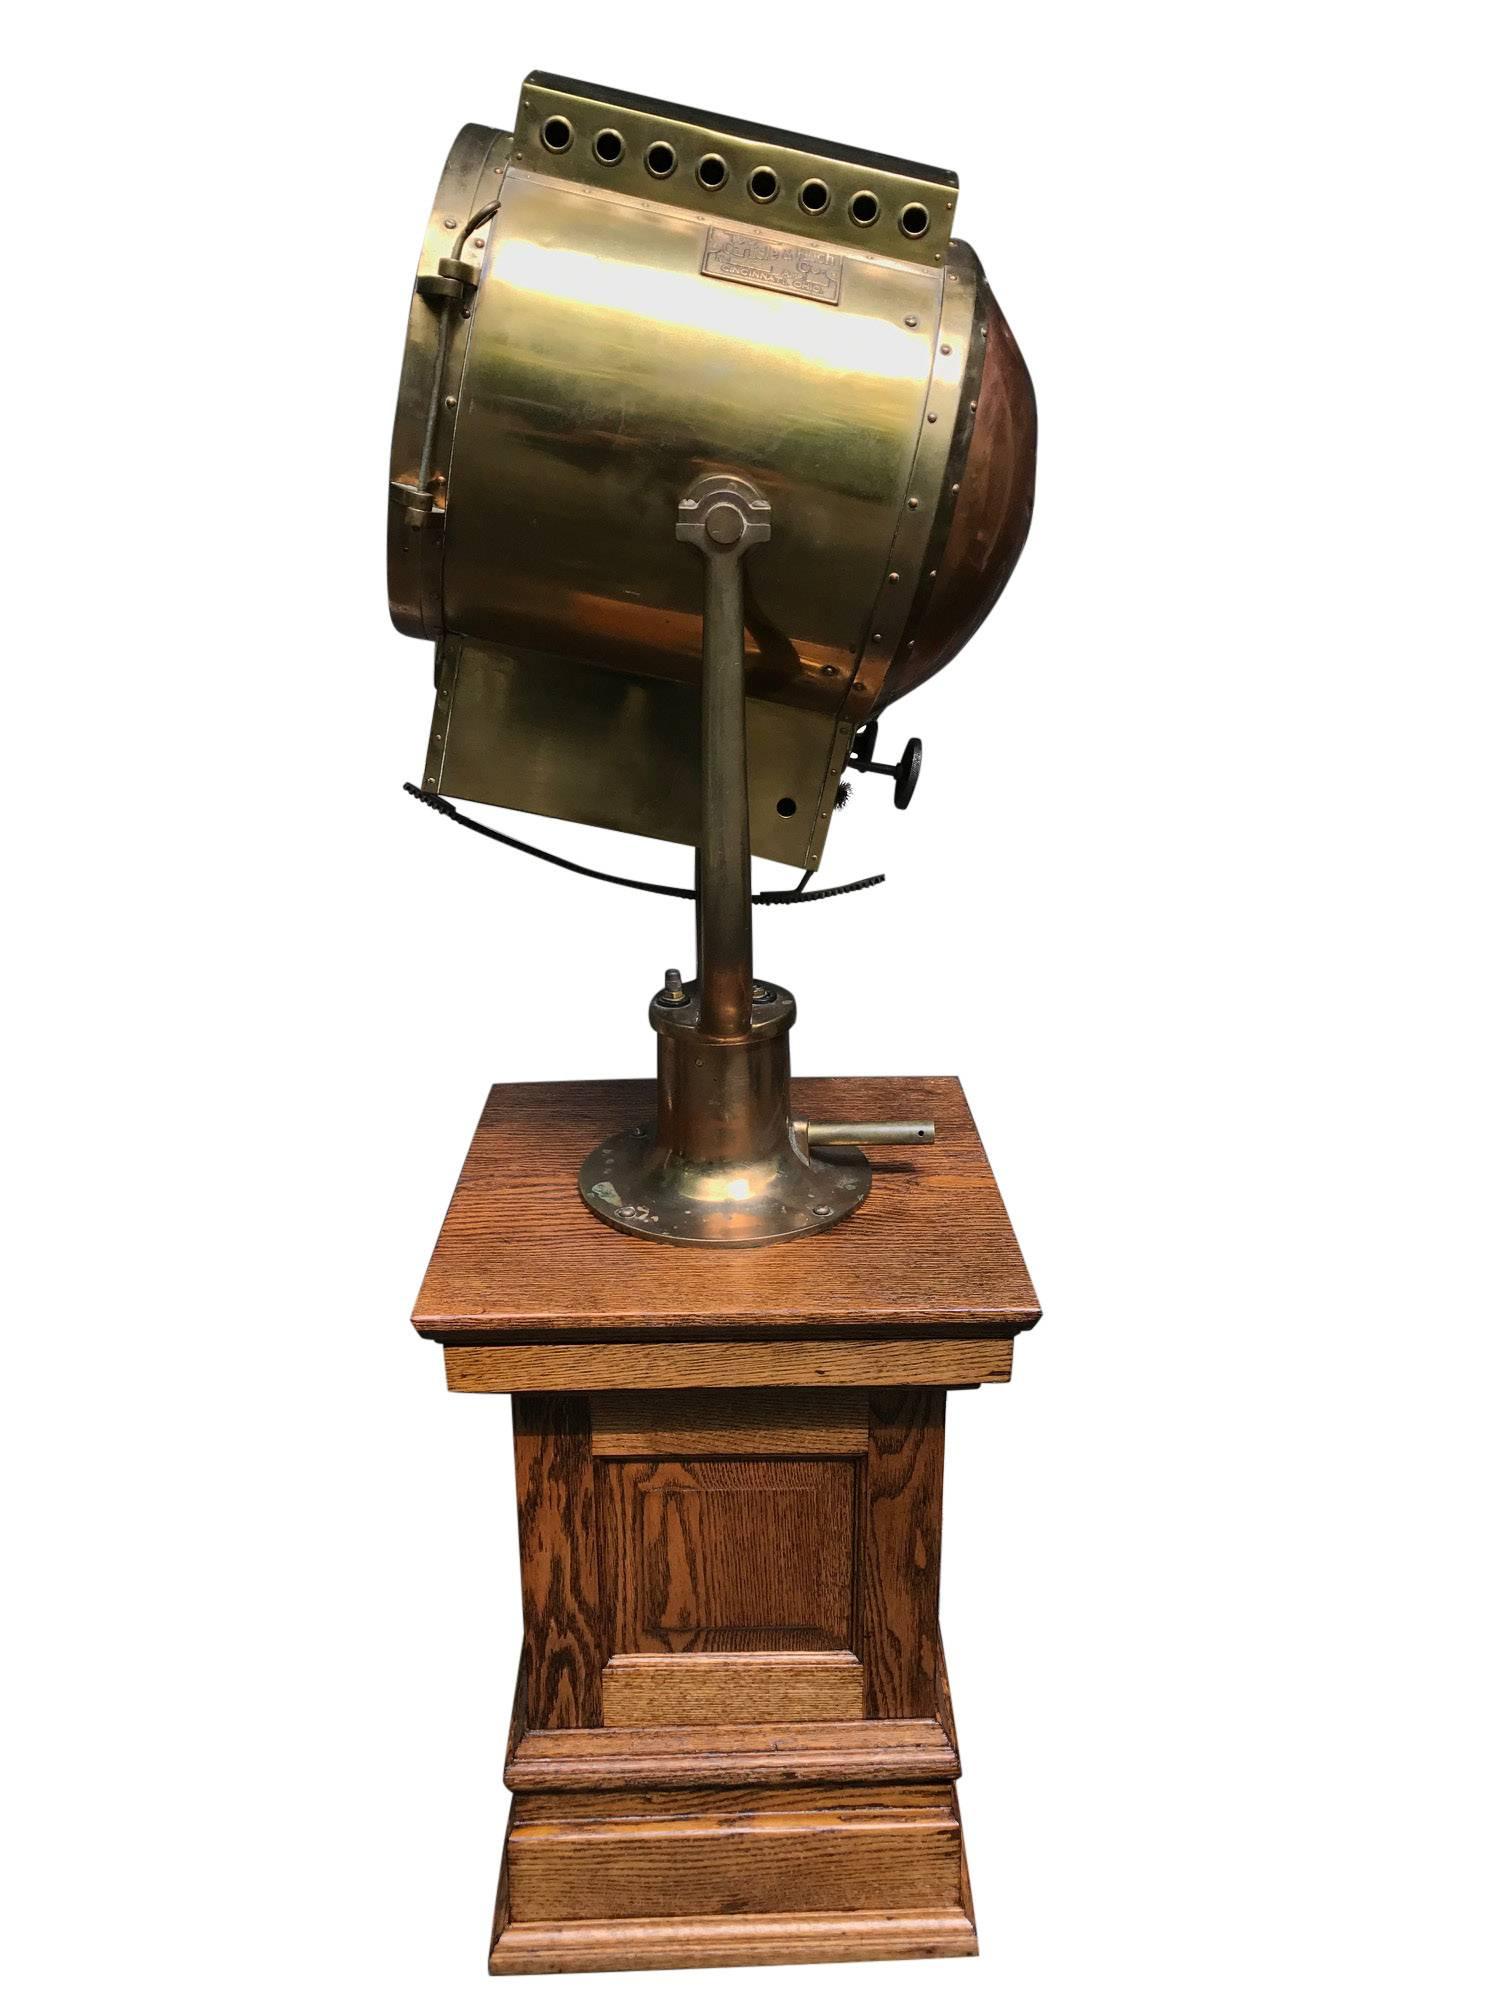 Massive brass and copper WWII ship searchlight by Carlisle & Finch. Rare condition and size. Interior mechanism and brass fixture adjust vertically and horizontally.